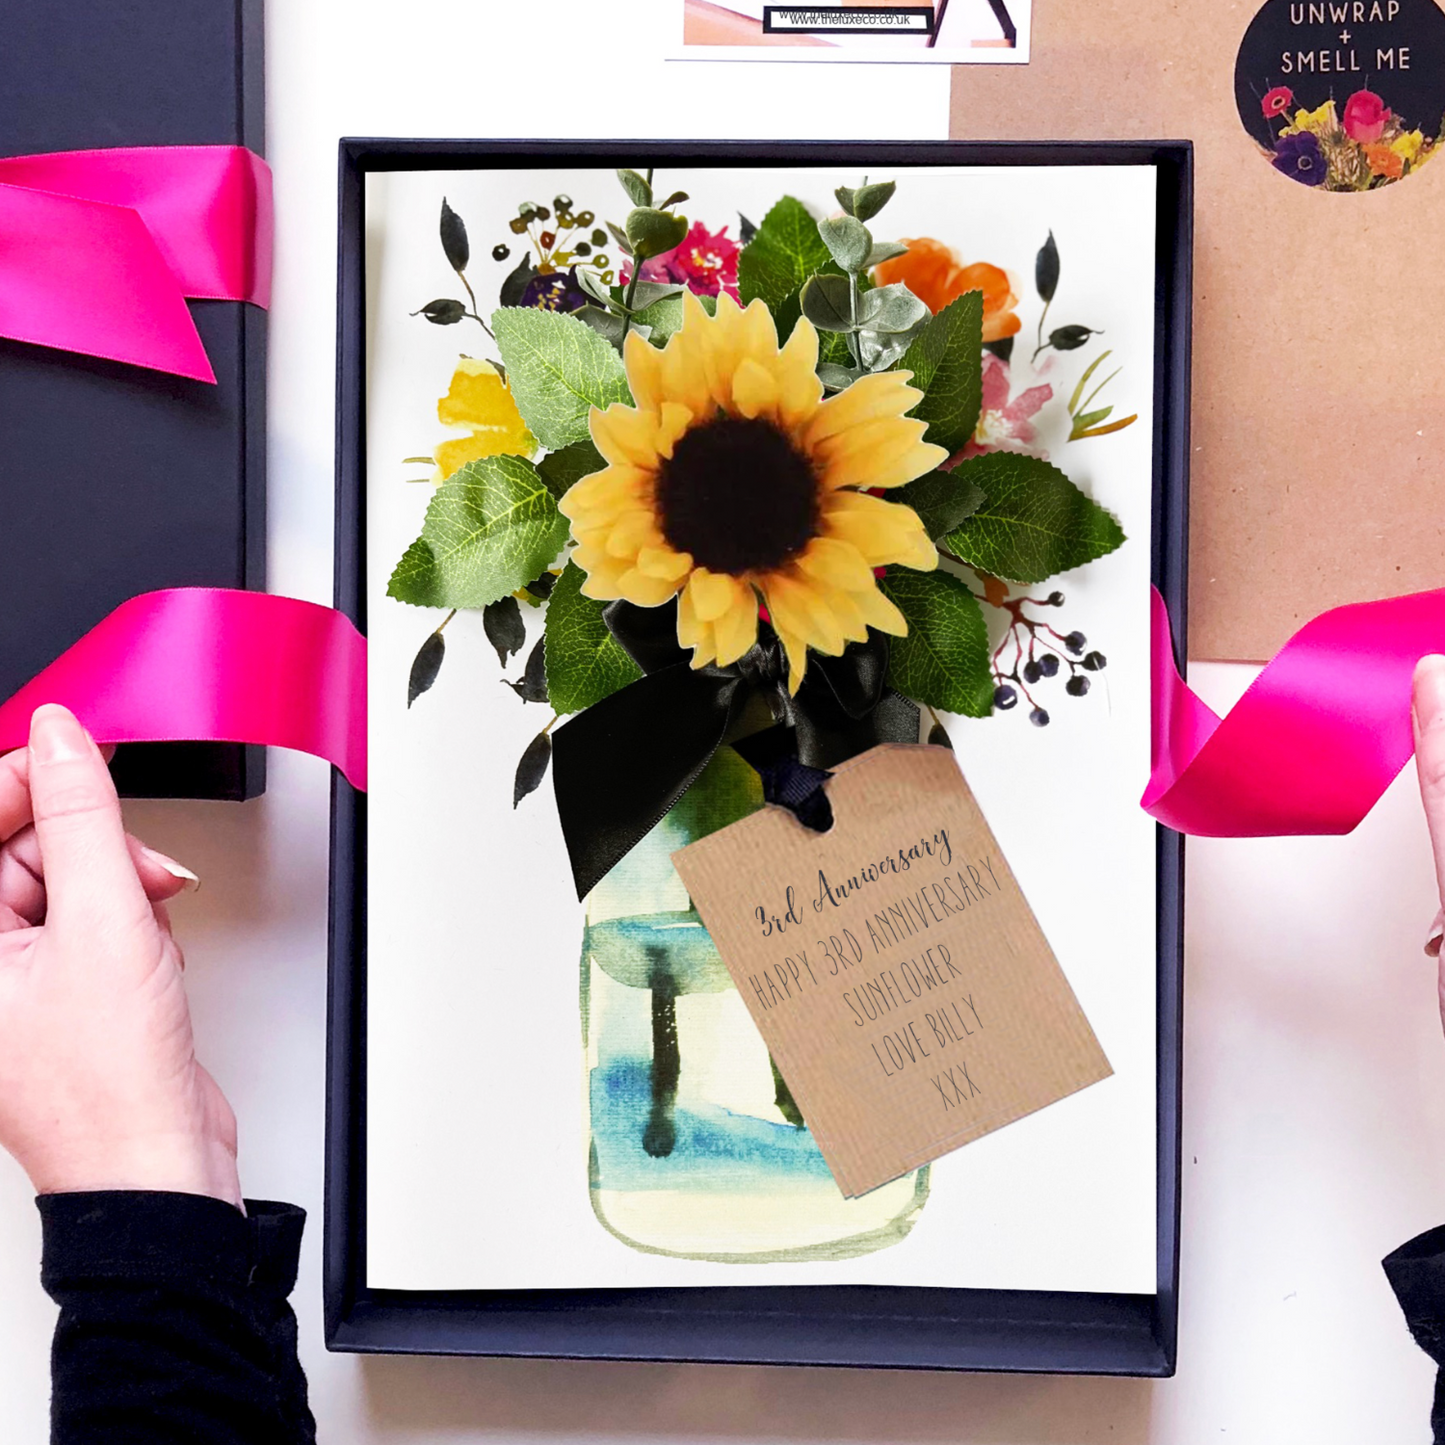 Bloom 3rd anniversary card sunflowers - the material for the 3rd anniversary flower | The Luxe Co